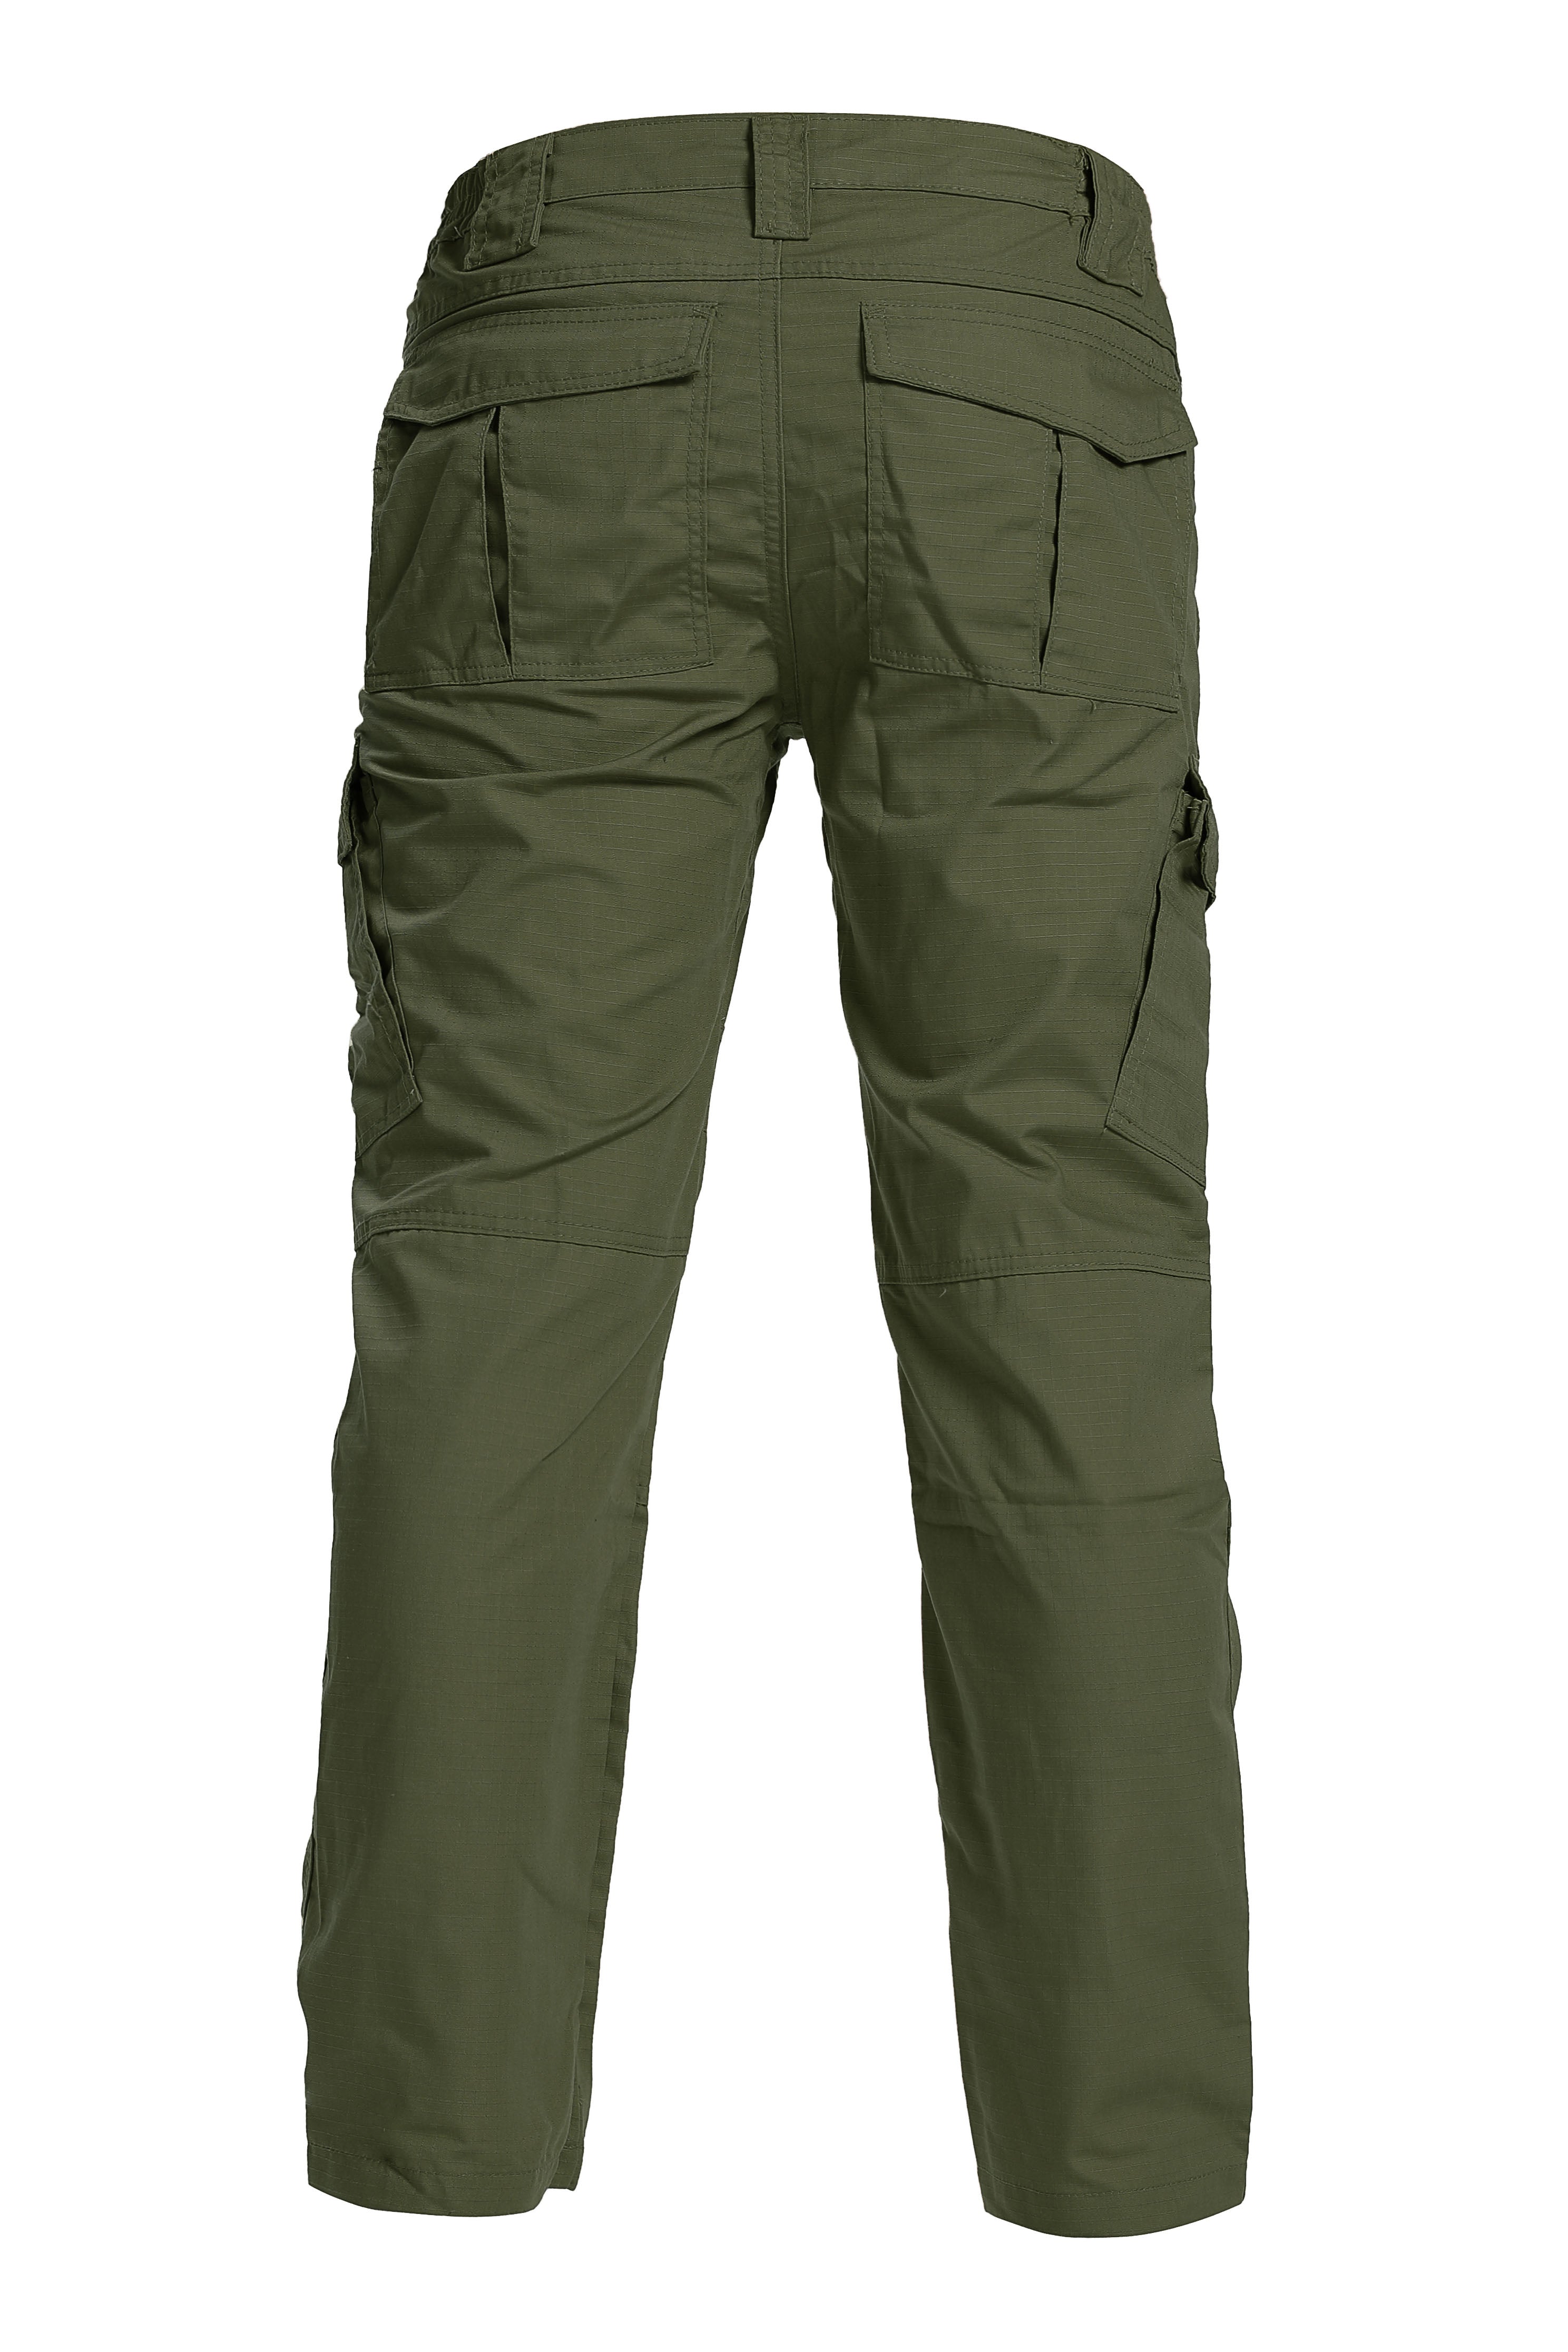 Mens Chinos Elastic Waist Cargo Trousers Casual Baggy Military Combat Pants  Size